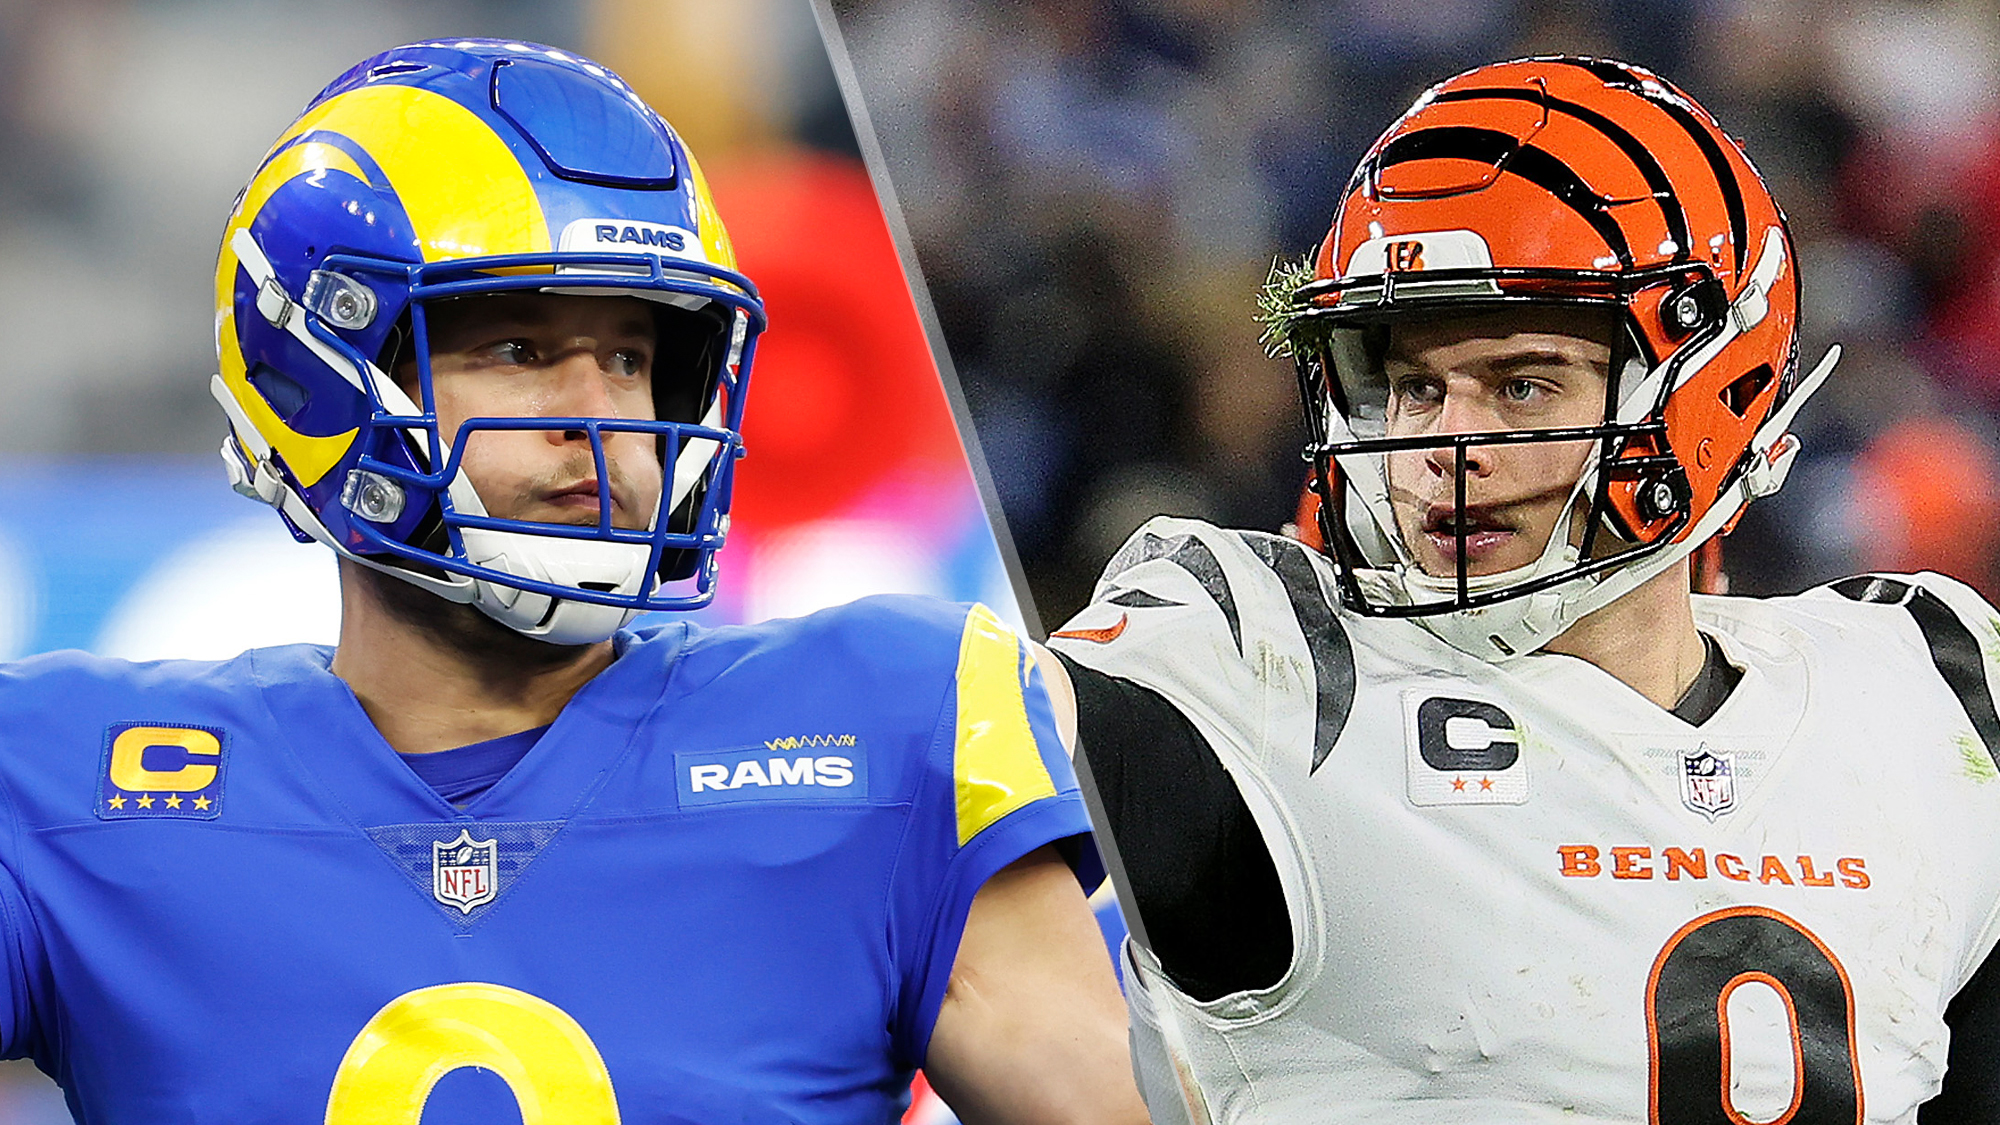 Super Bowl 2022 on Fire TV: How to watch Rams vs Bengals for free